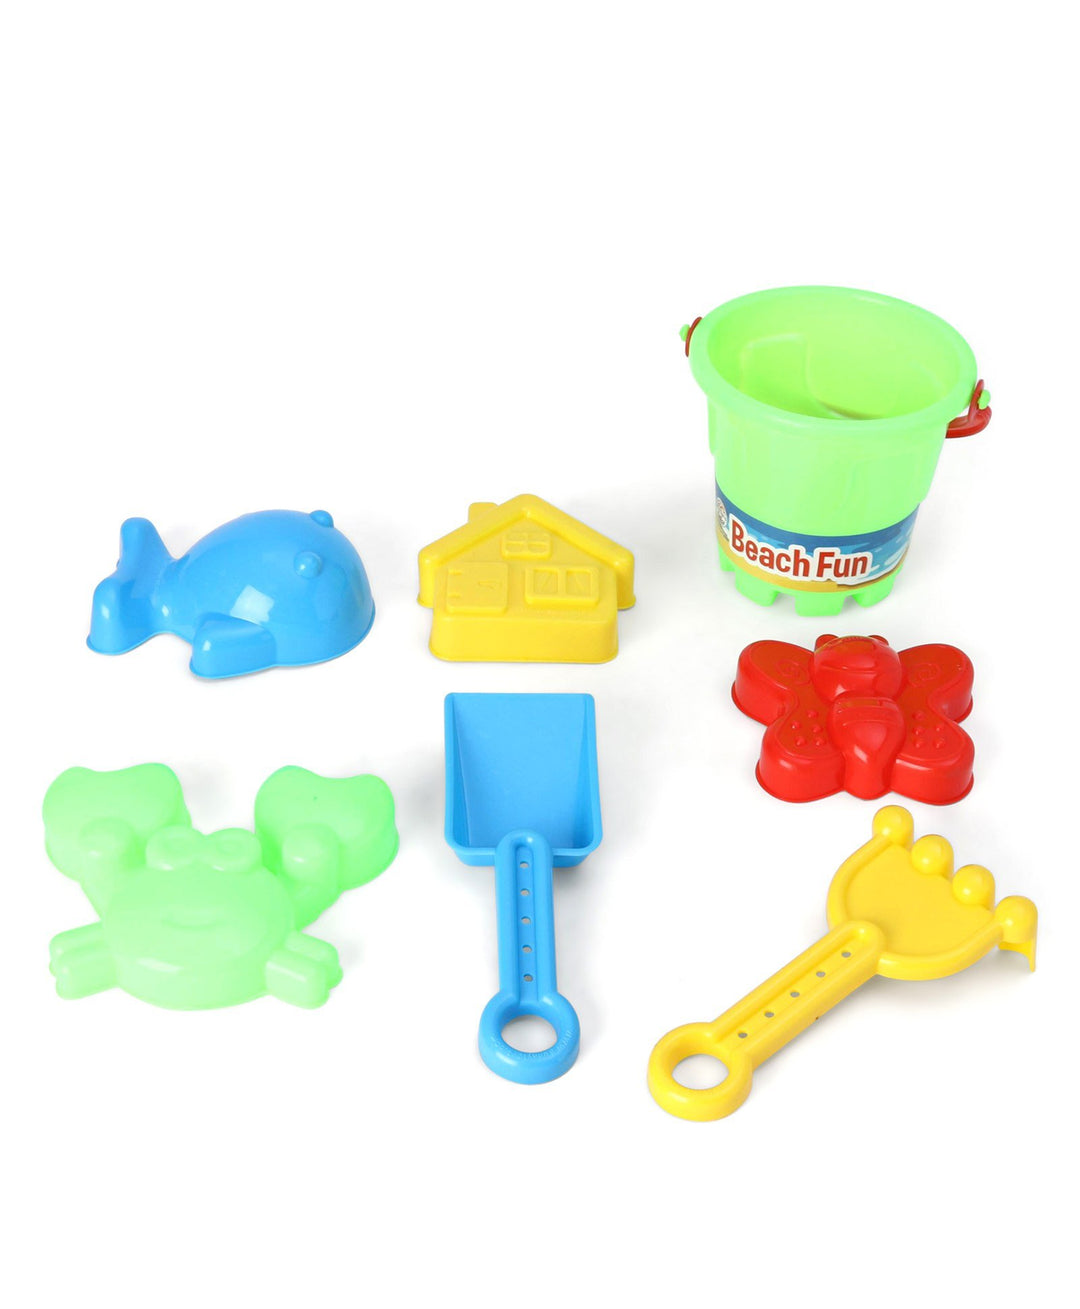 RATNA'S Beach Fun Senior Play Set for Kids/Toddlers Sand Beach Toys Set - Pack Includes 1 Bucket, 4 Big Scoops, 2 Moulds 7 PCS Color May Vary